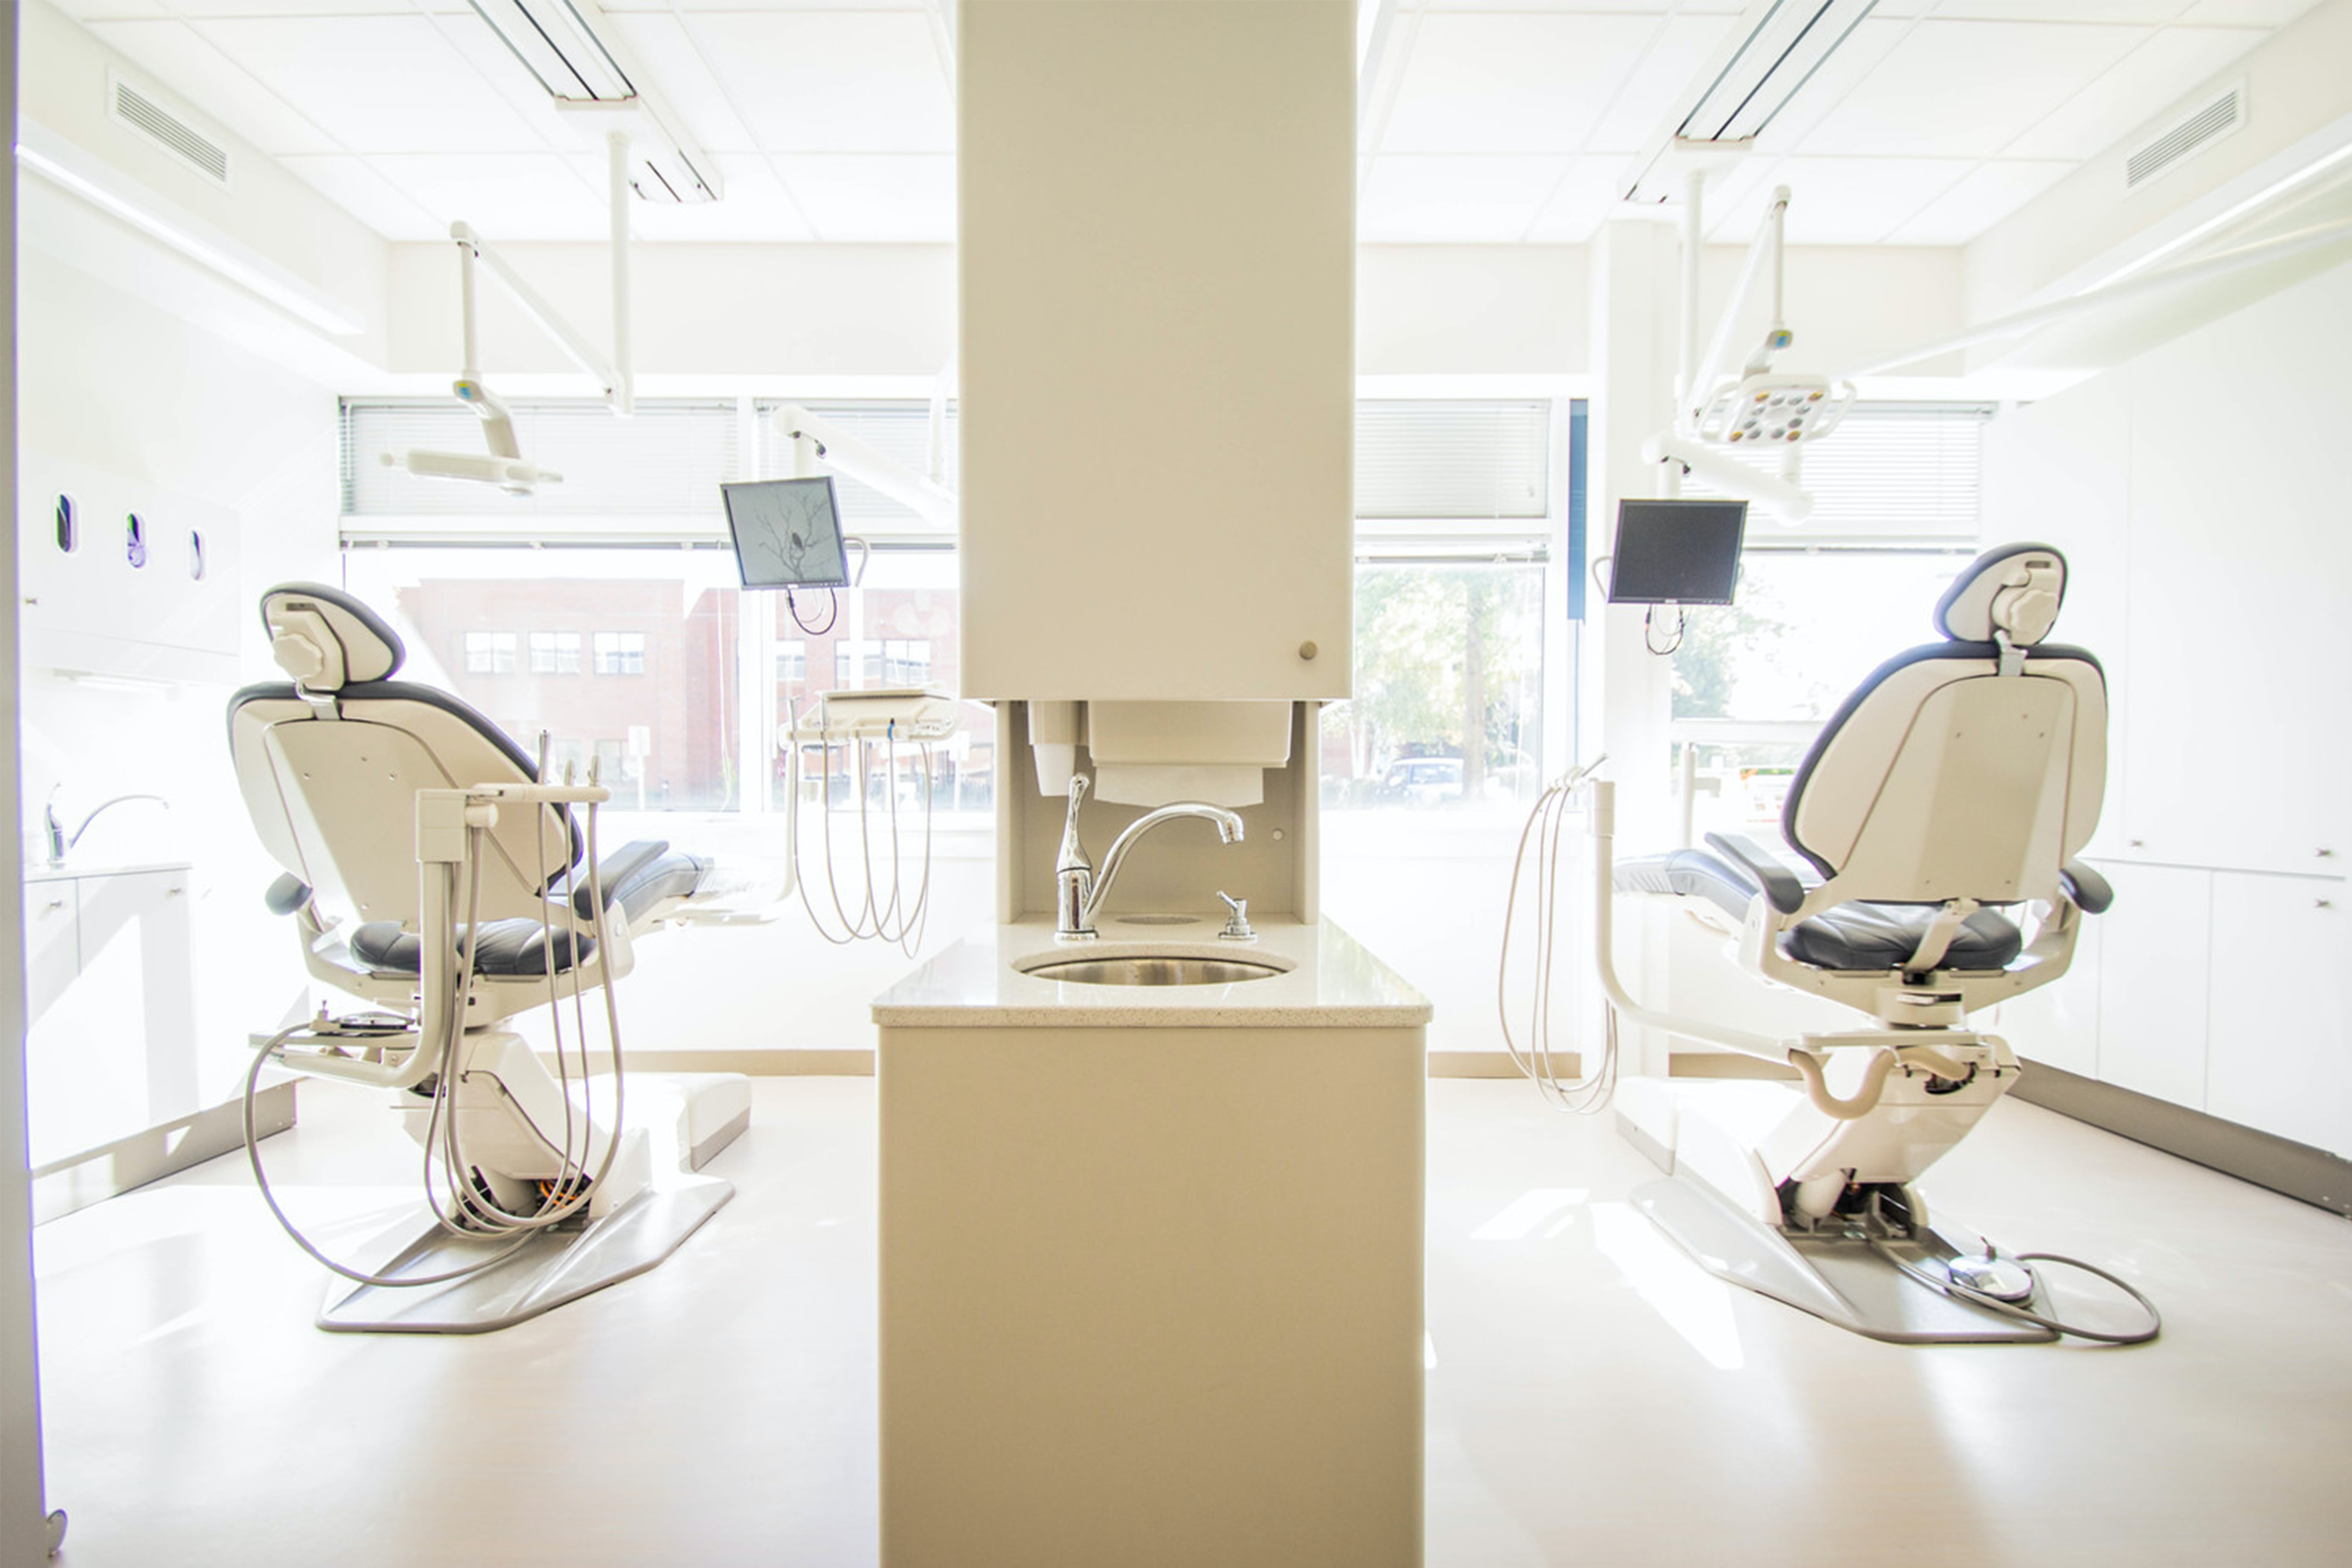 Provision of dental treatment in Põlva county